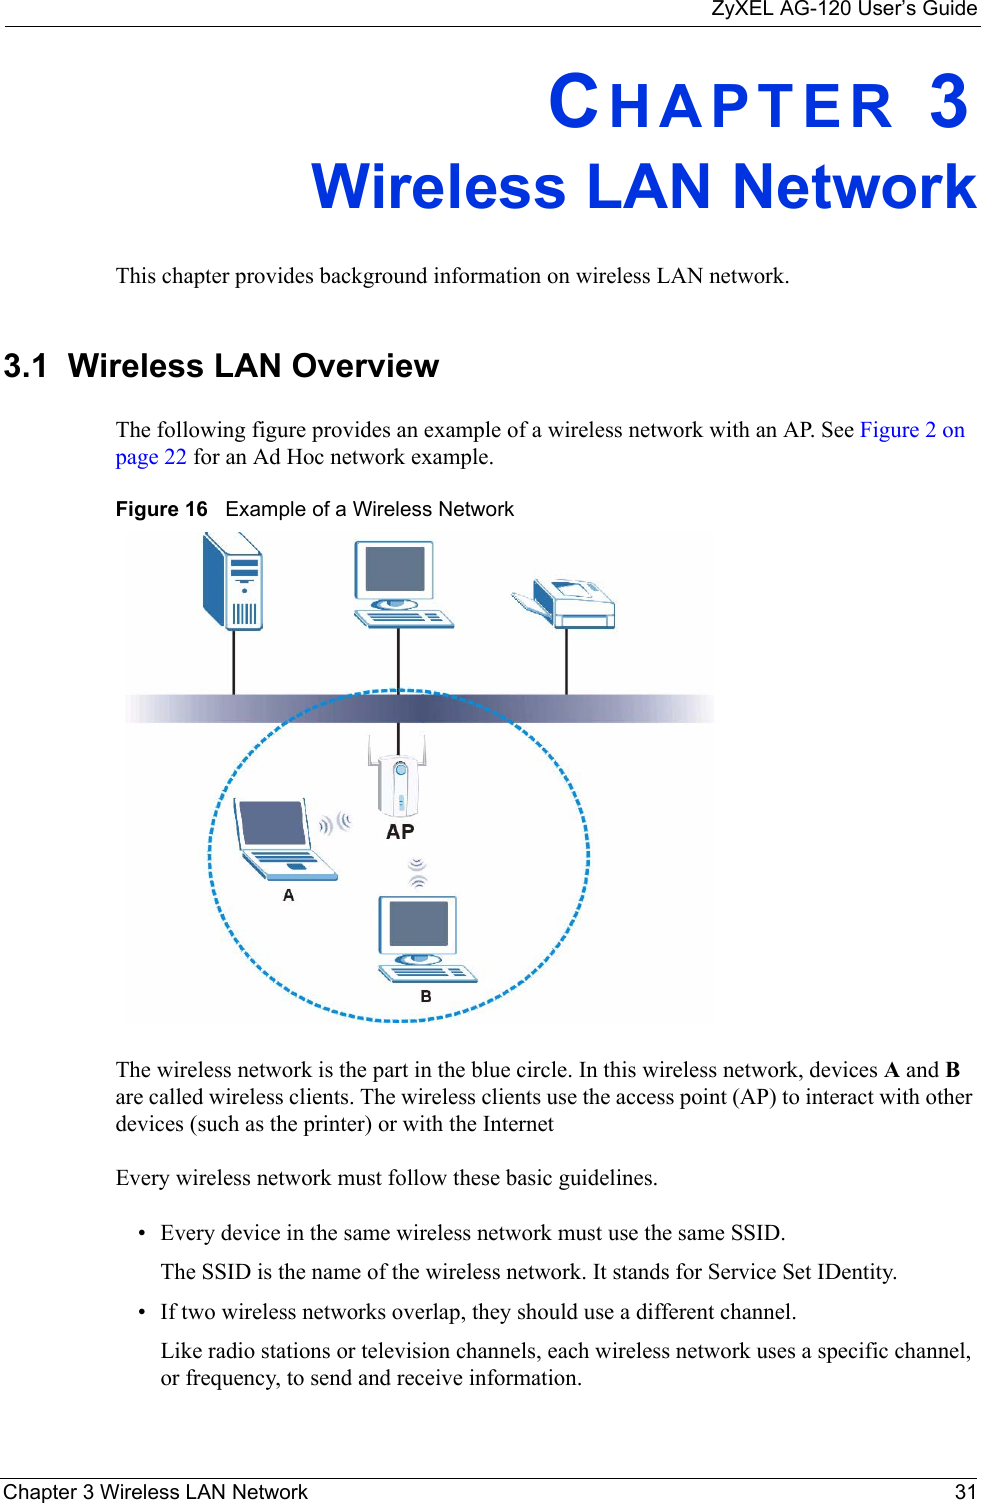 ZyXEL AG-120 User’s GuideChapter 3 Wireless LAN Network 31CHAPTER 3Wireless LAN NetworkThis chapter provides background information on wireless LAN network.3.1  Wireless LAN Overview The following figure provides an example of a wireless network with an AP. See Figure 2 on page 22 for an Ad Hoc network example.Figure 16   Example of a Wireless NetworkThe wireless network is the part in the blue circle. In this wireless network, devices A and B are called wireless clients. The wireless clients use the access point (AP) to interact with other devices (such as the printer) or with the InternetEvery wireless network must follow these basic guidelines.• Every device in the same wireless network must use the same SSID.The SSID is the name of the wireless network. It stands for Service Set IDentity.• If two wireless networks overlap, they should use a different channel.Like radio stations or television channels, each wireless network uses a specific channel, or frequency, to send and receive information.